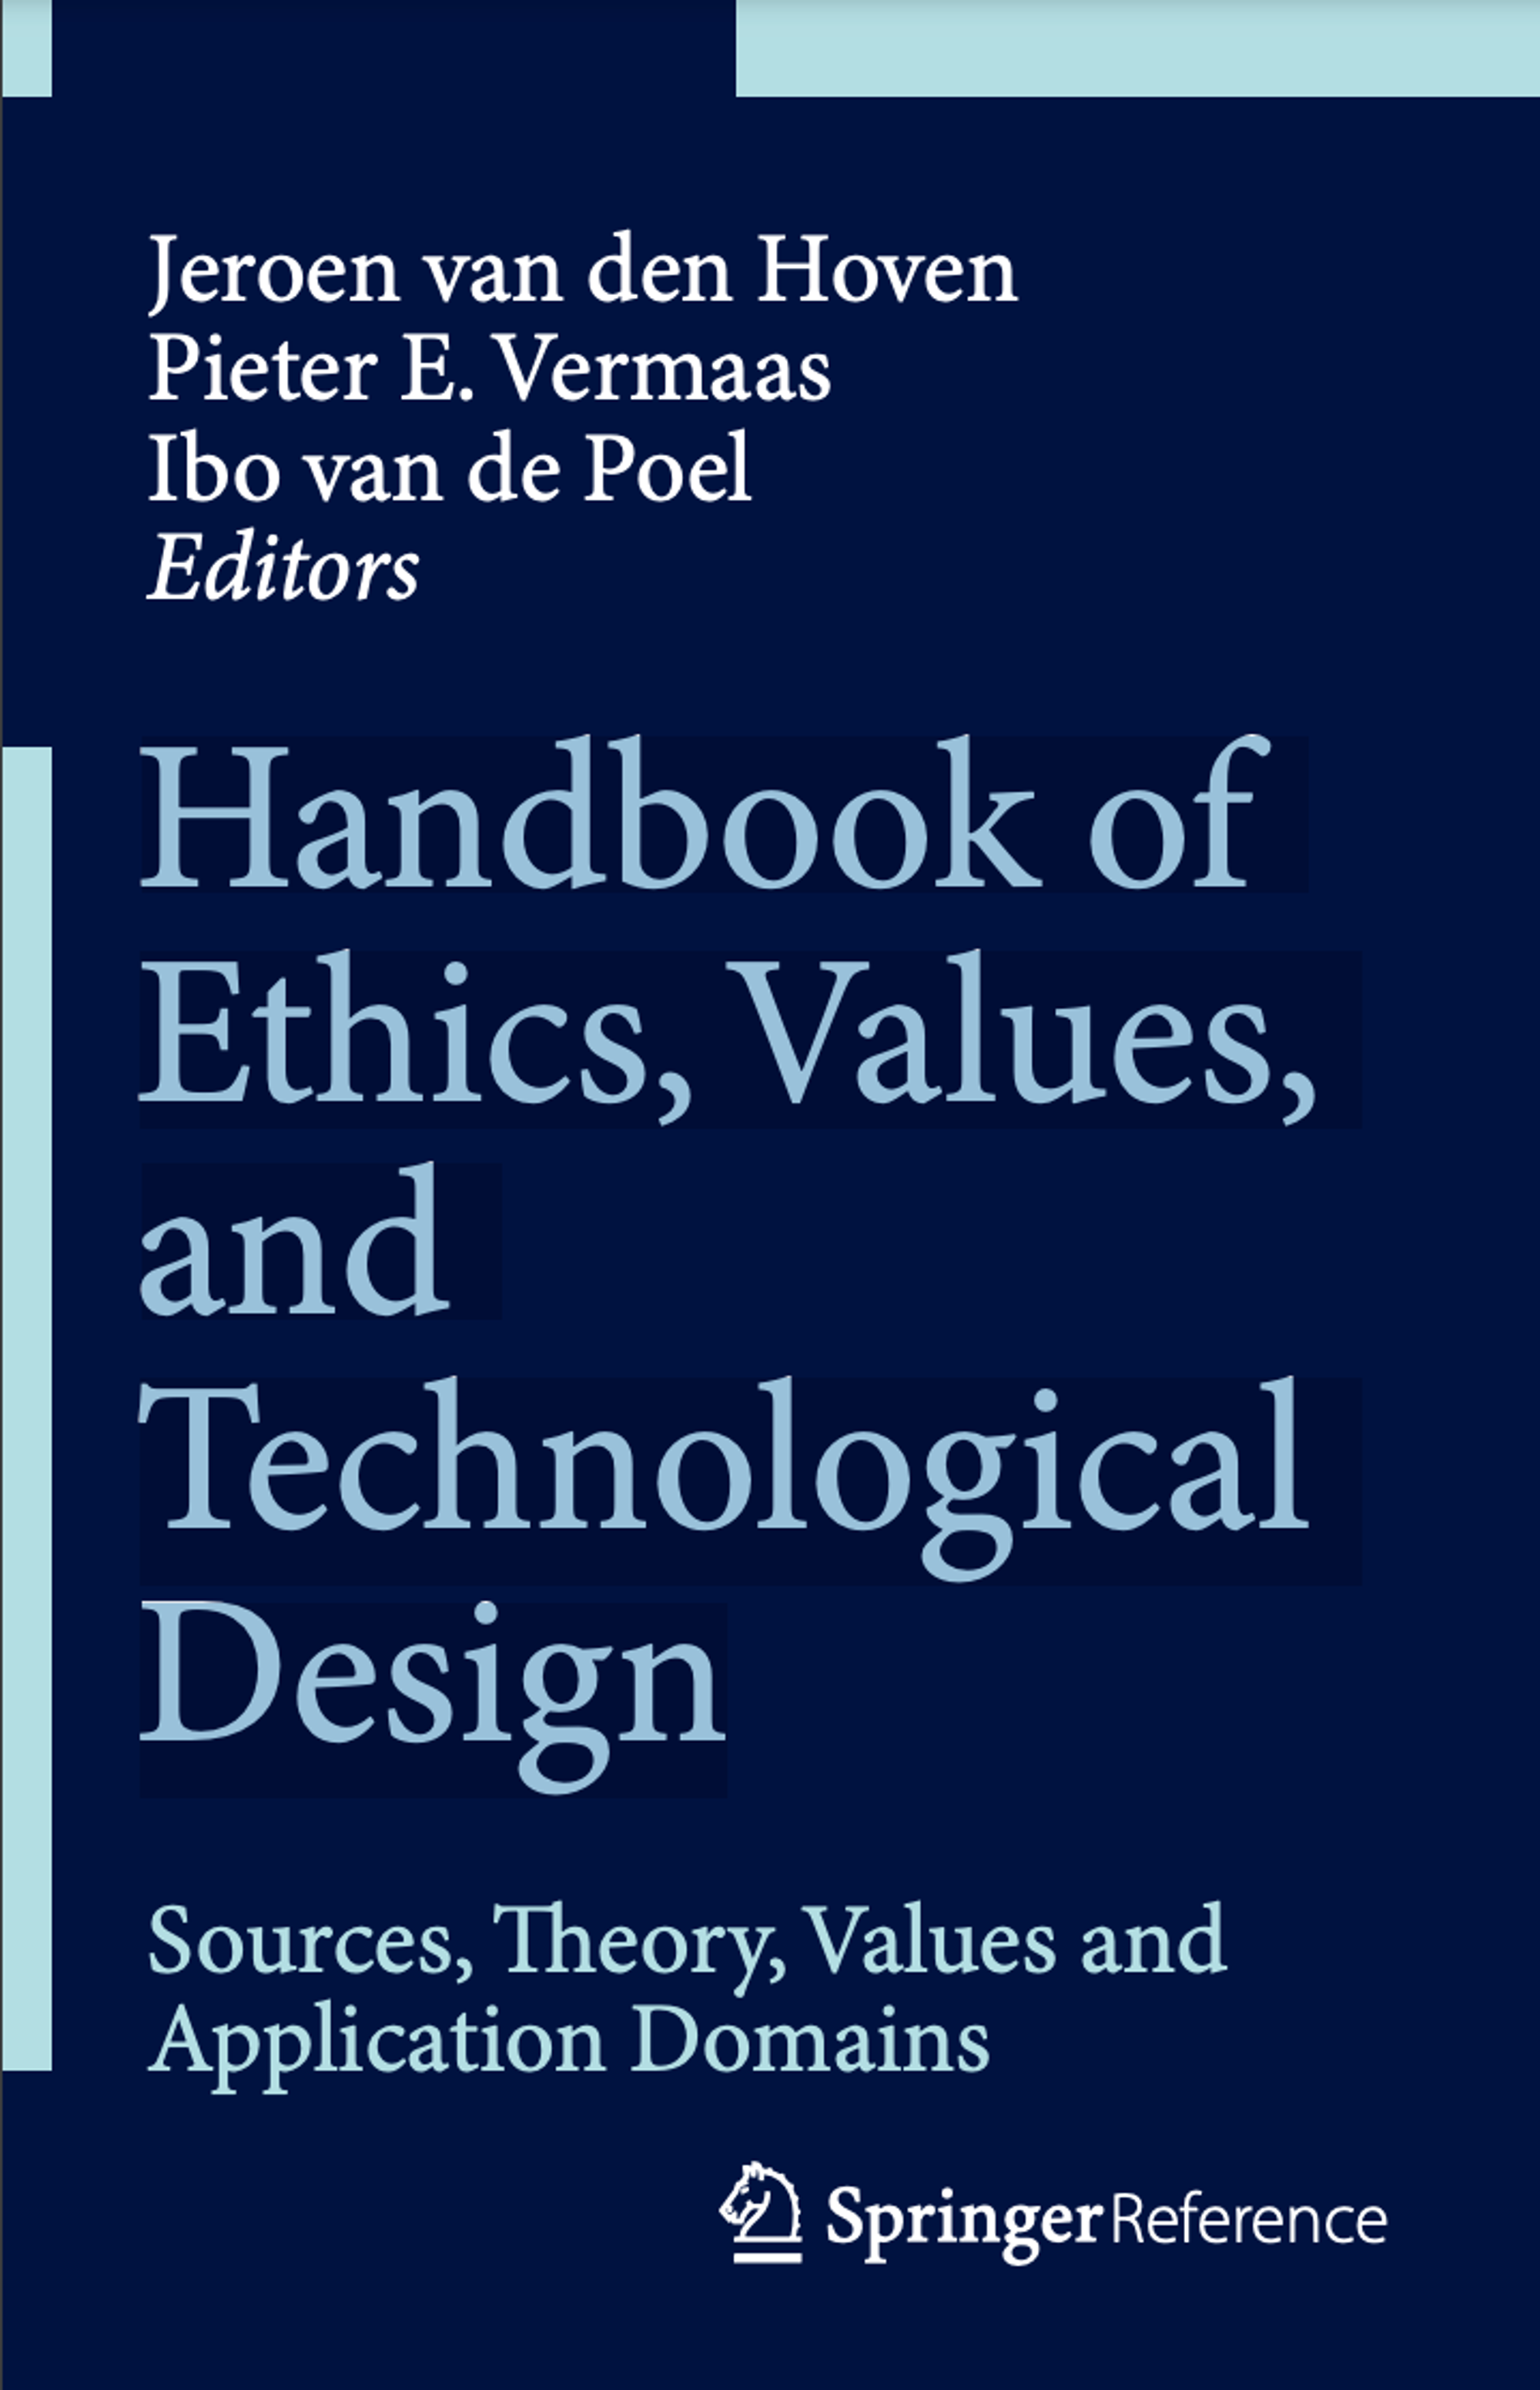 Handbook of Ethics, Values, and Technological Design